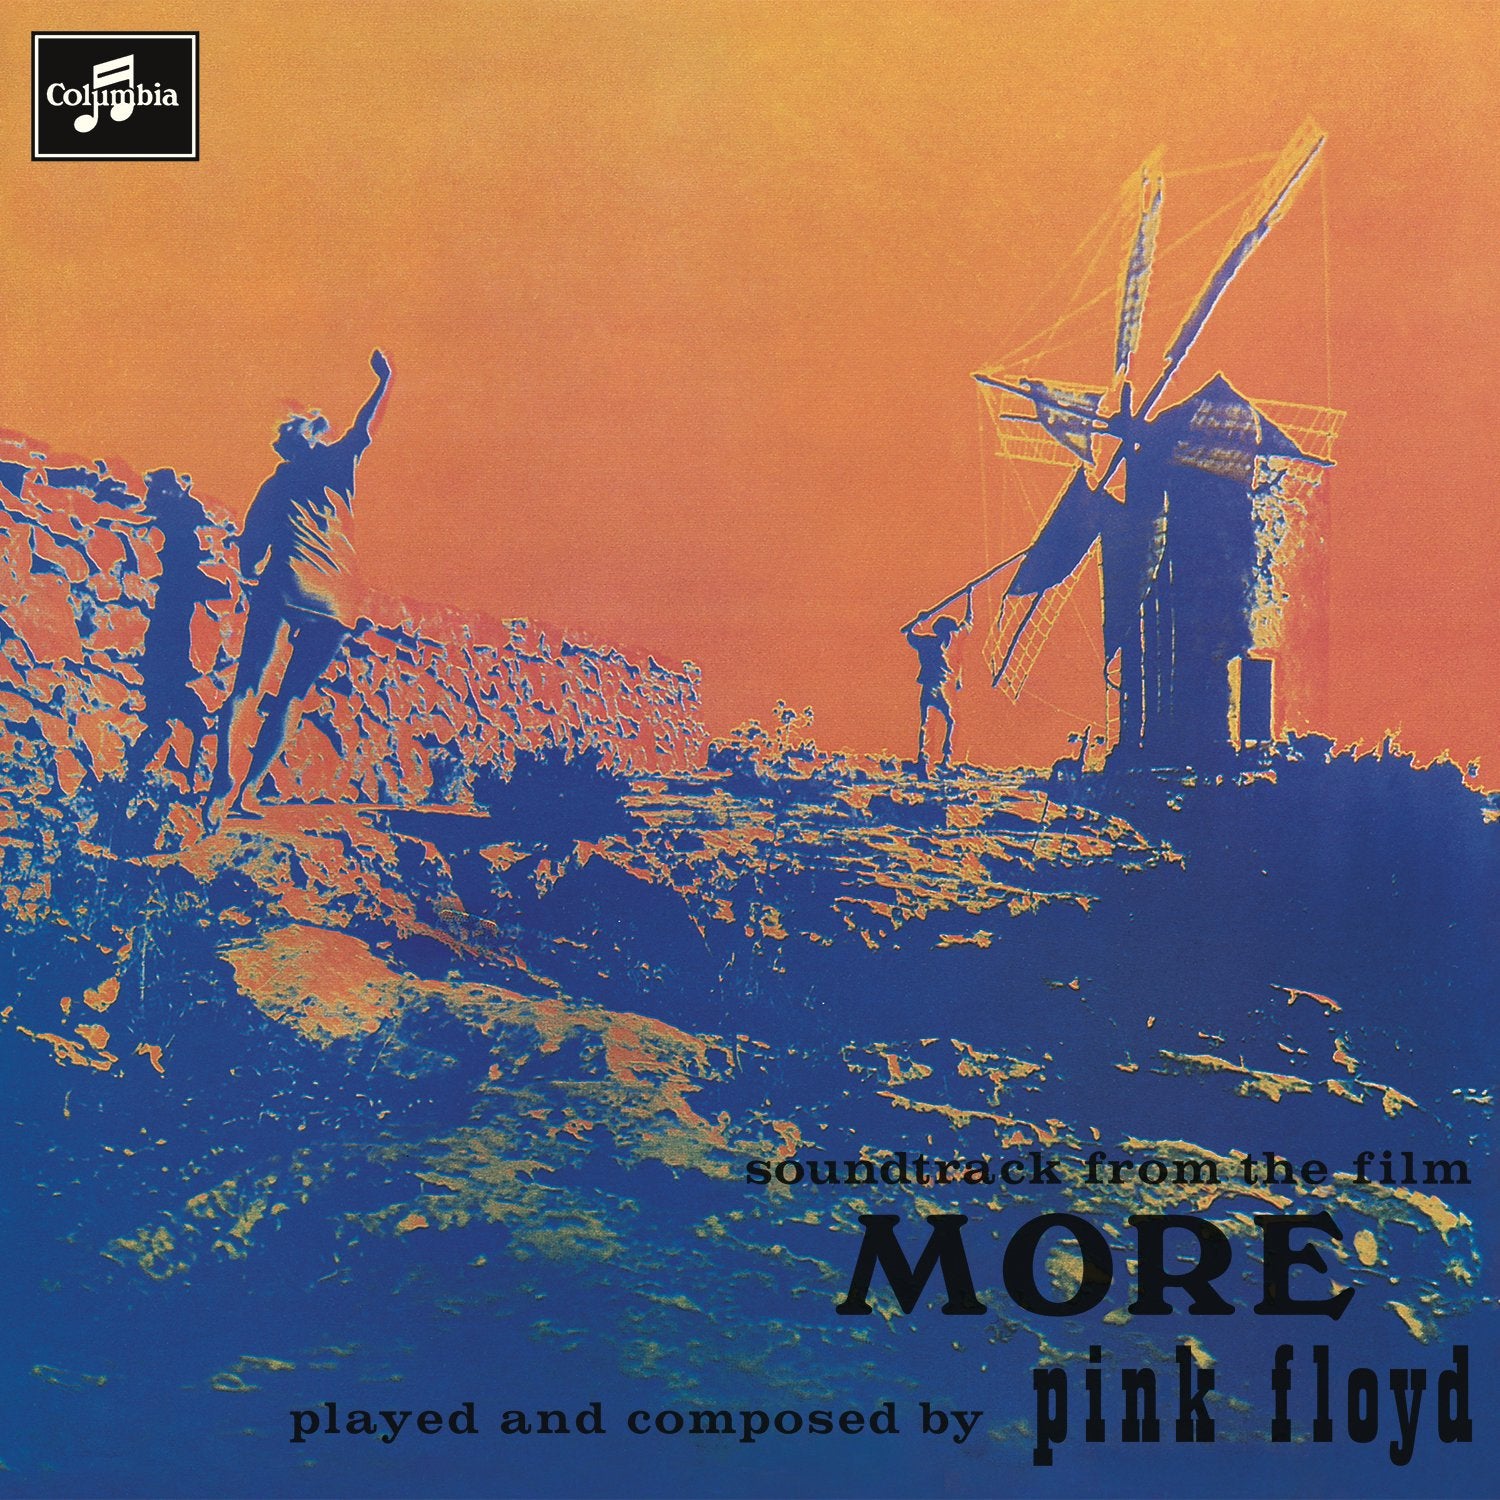 Pink Floyd – Soundtrack From The Film "More" LP (180g, Remastered)